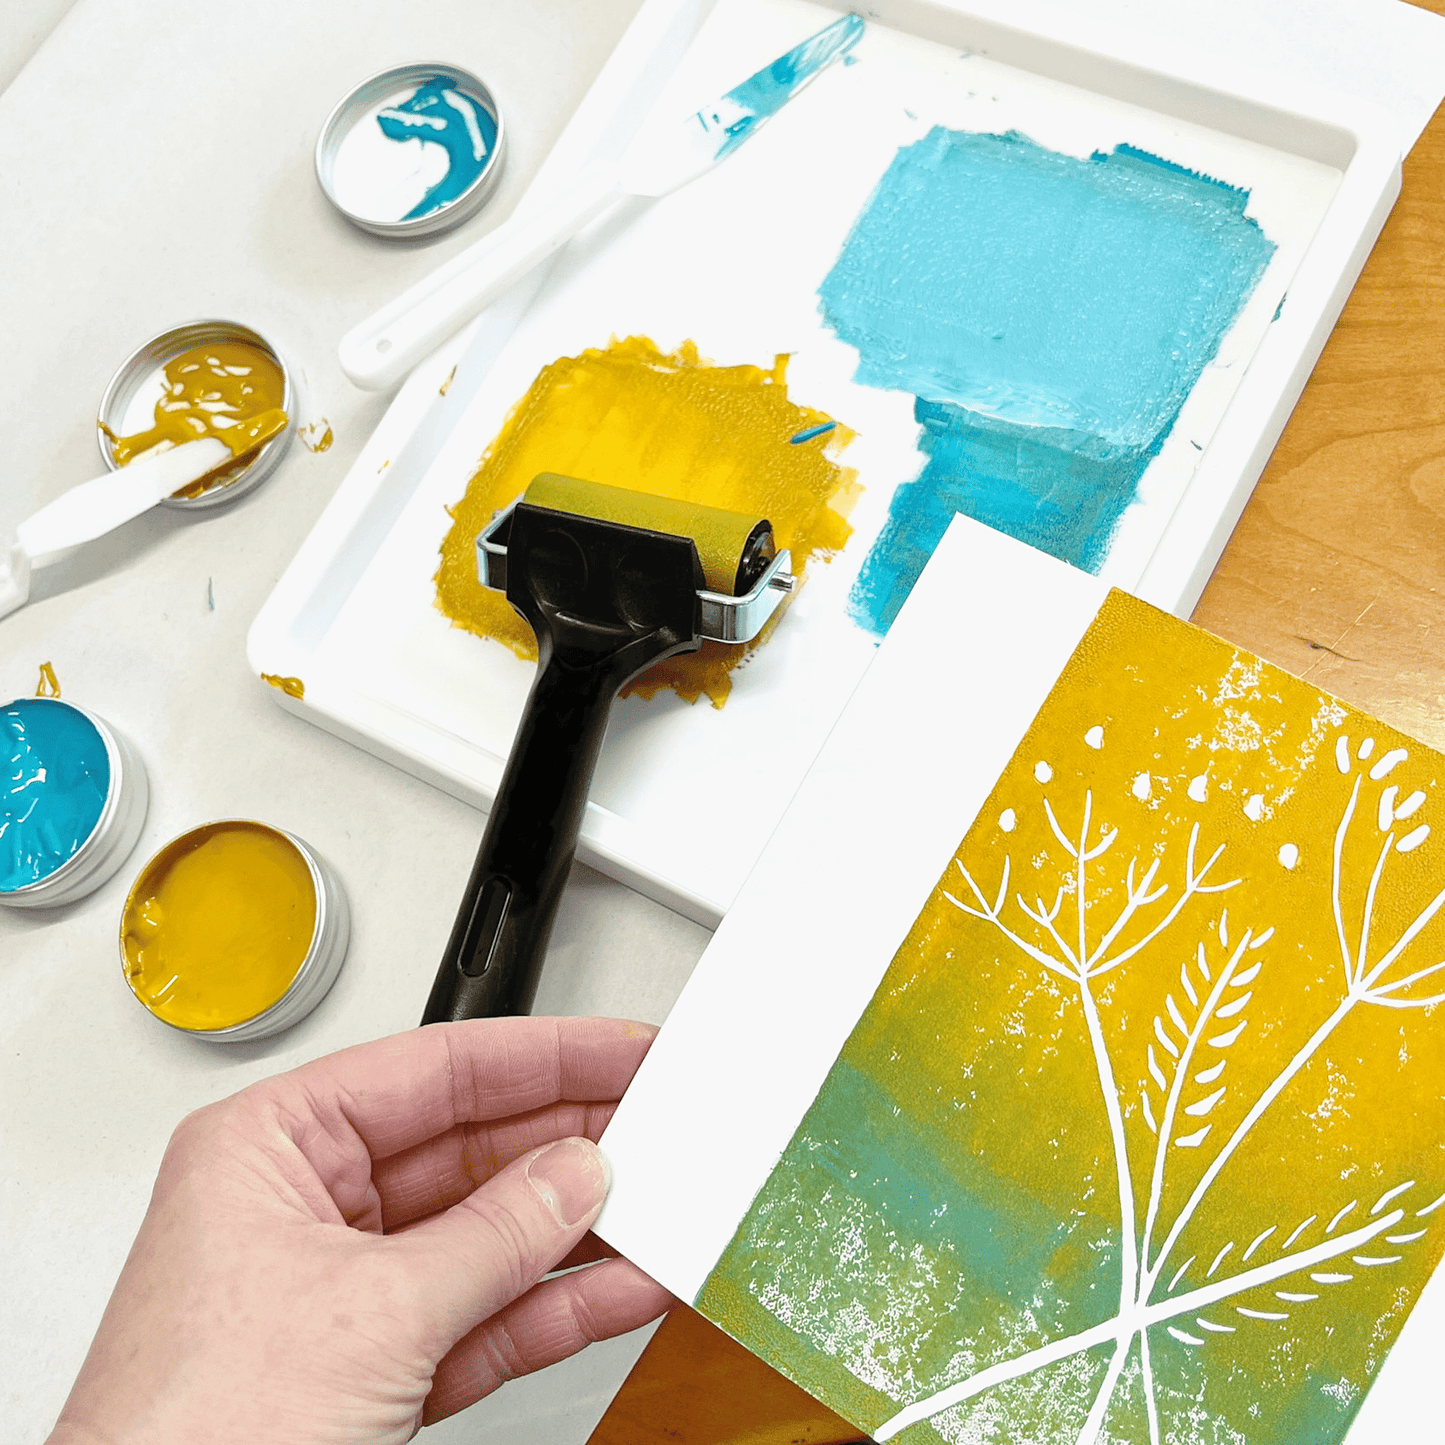 Linocut & print classic kit with 2 ink colours – Clever Hands